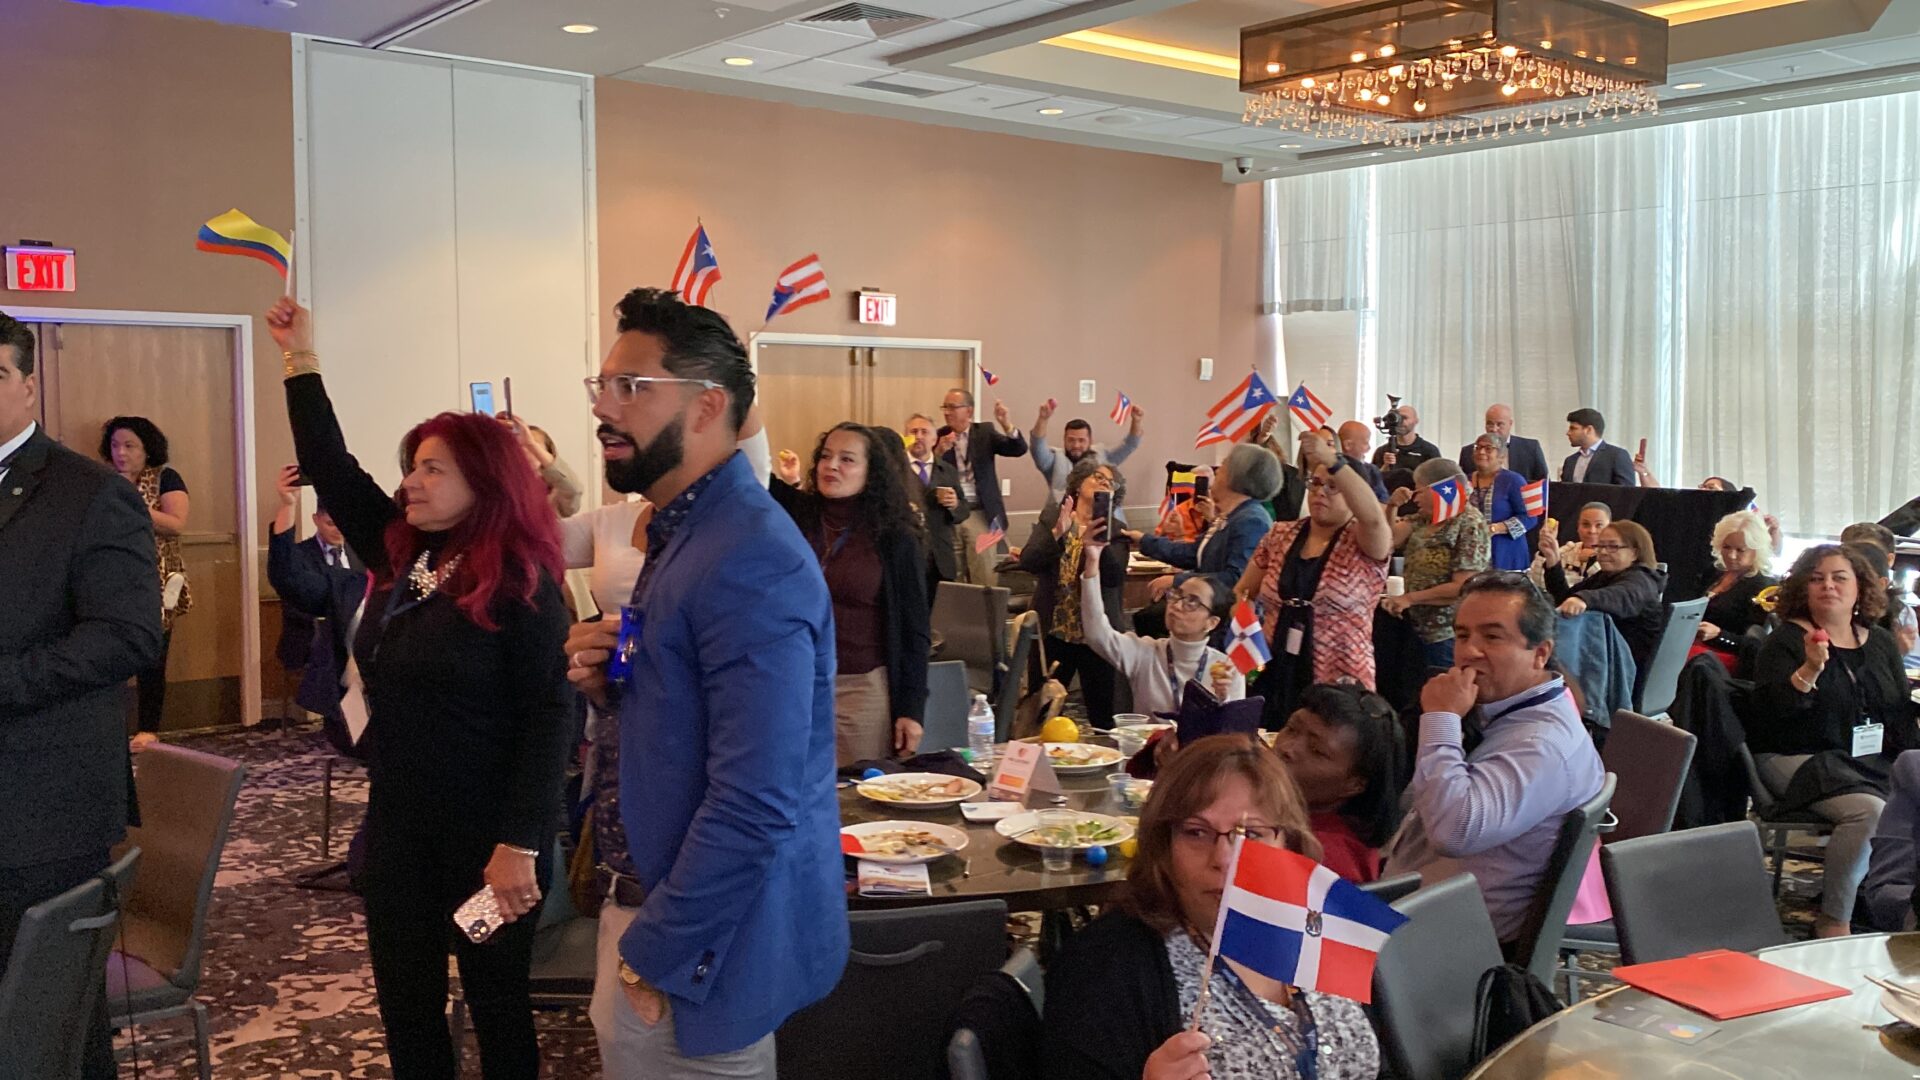 Attendees of the PA Latino Convention wave flags of their country or region of origin during a cultural celebration.